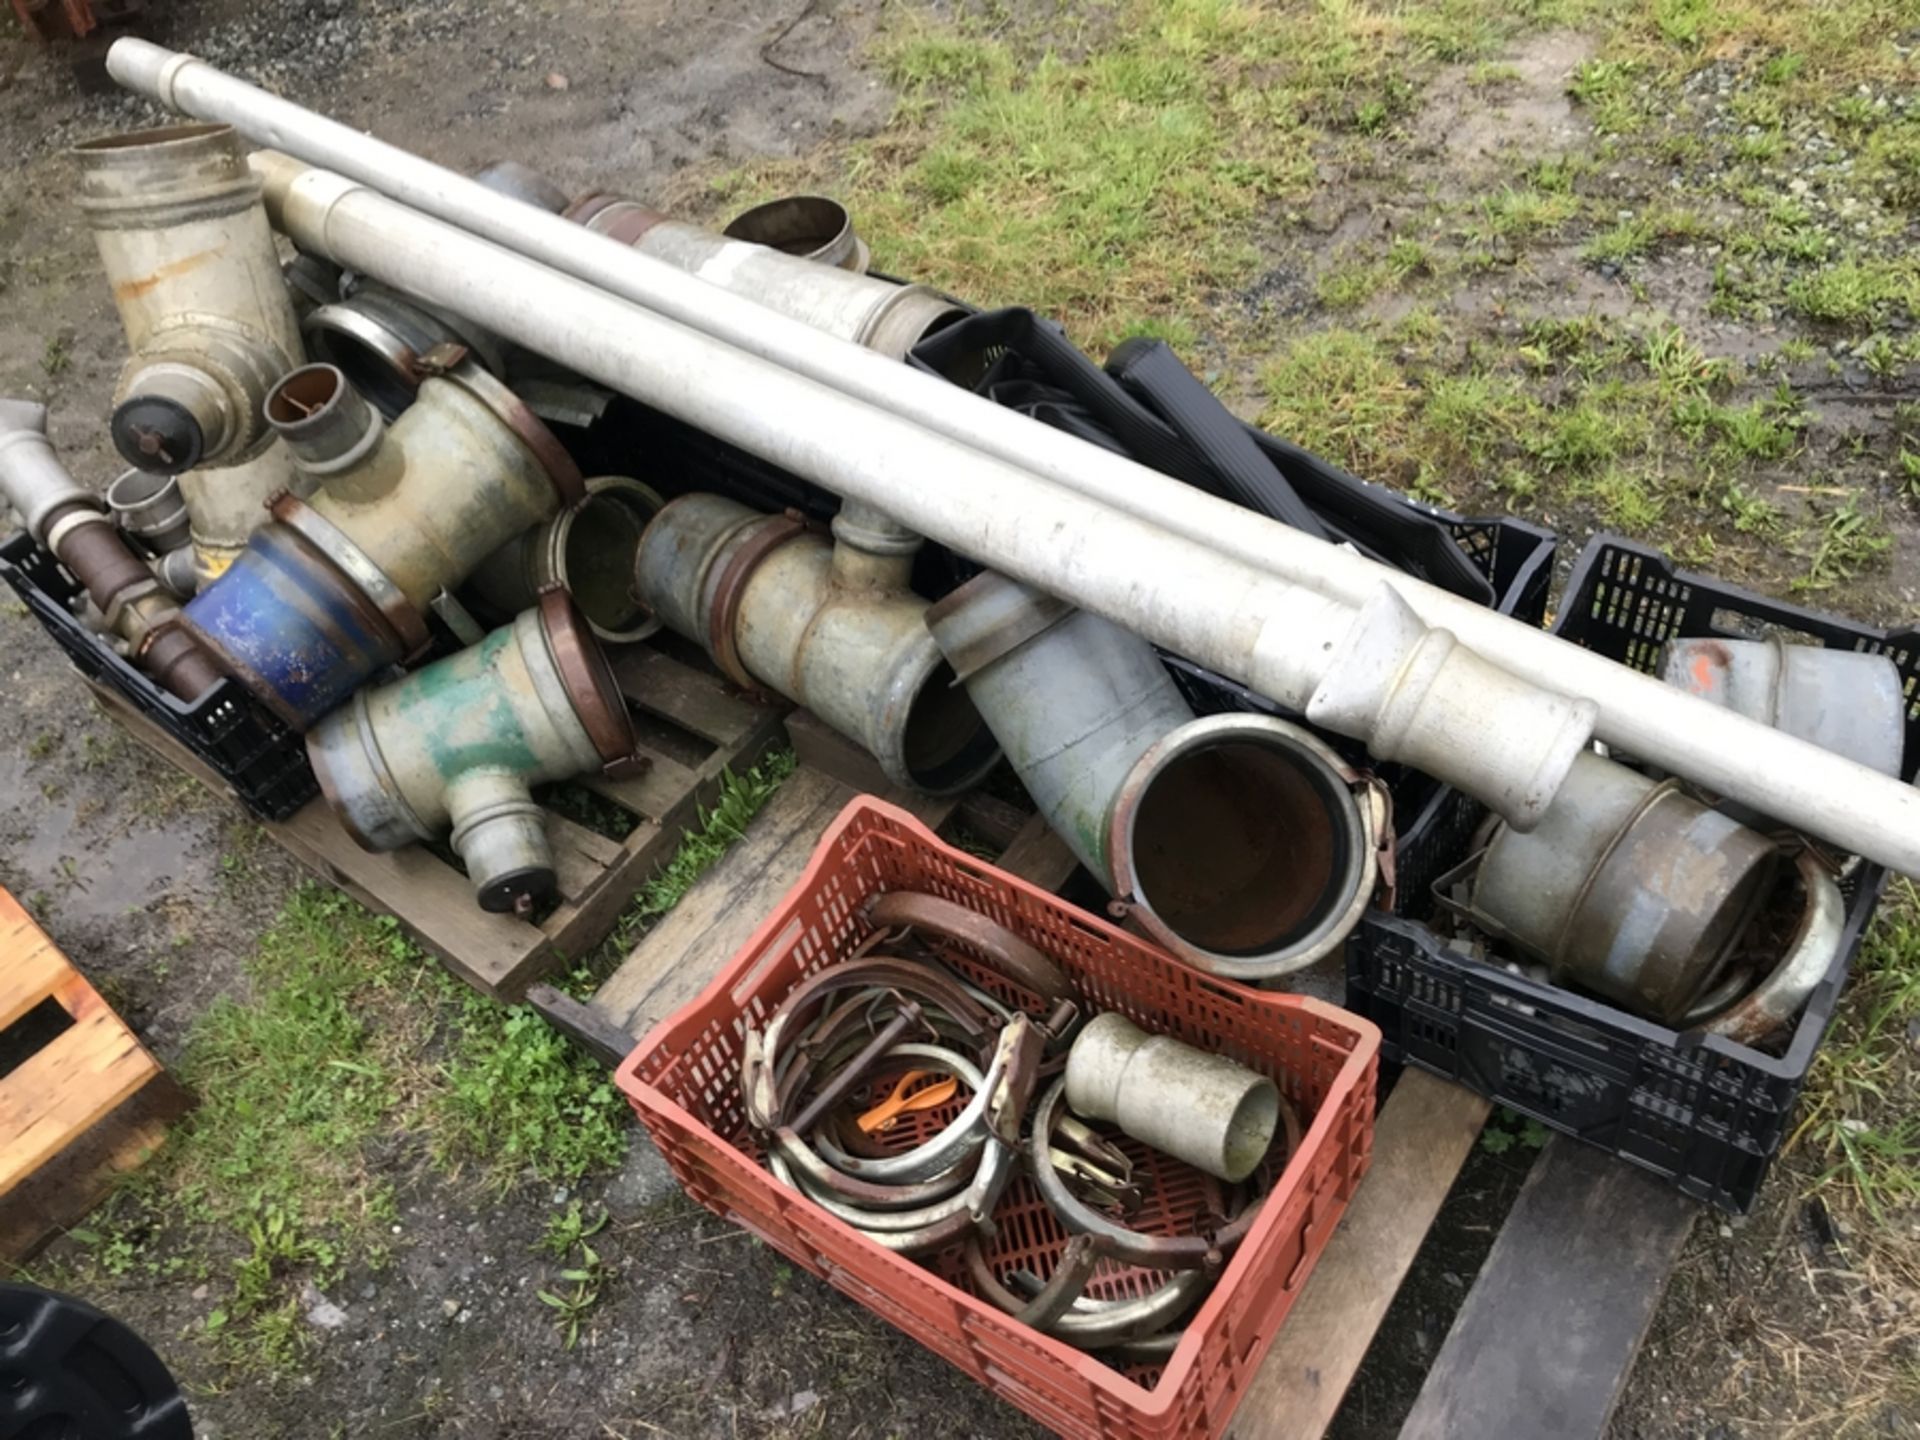 2 SKIDS OF IRRIGATION PIPE & FITTINGS